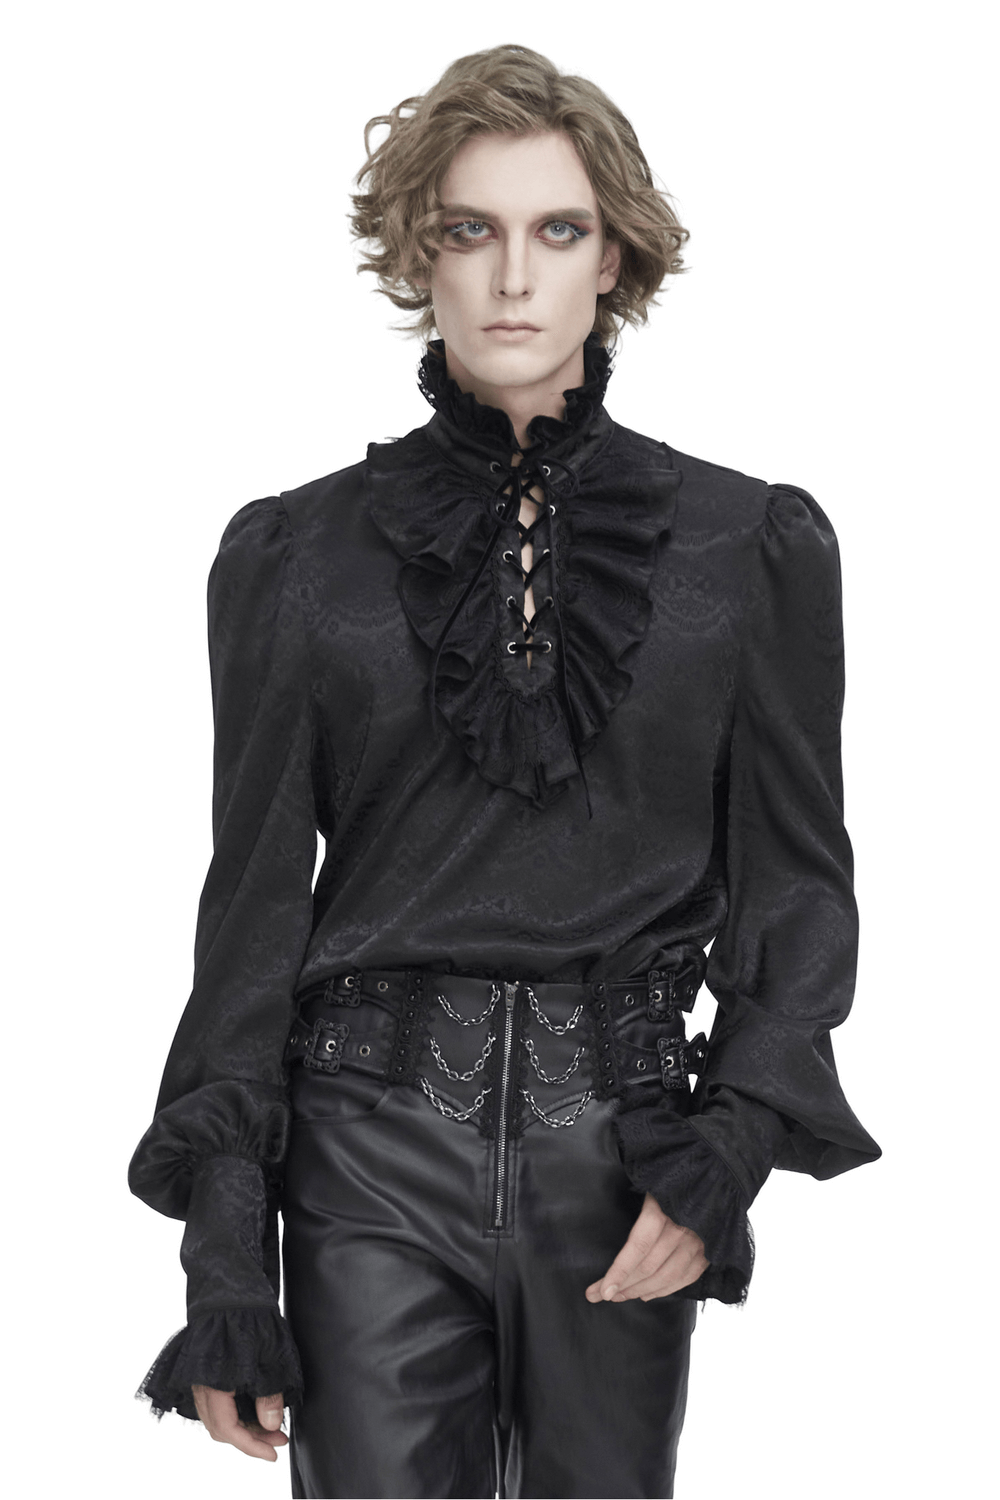 Chic Victorian Black Lace Shirt with Tassel Sleeves